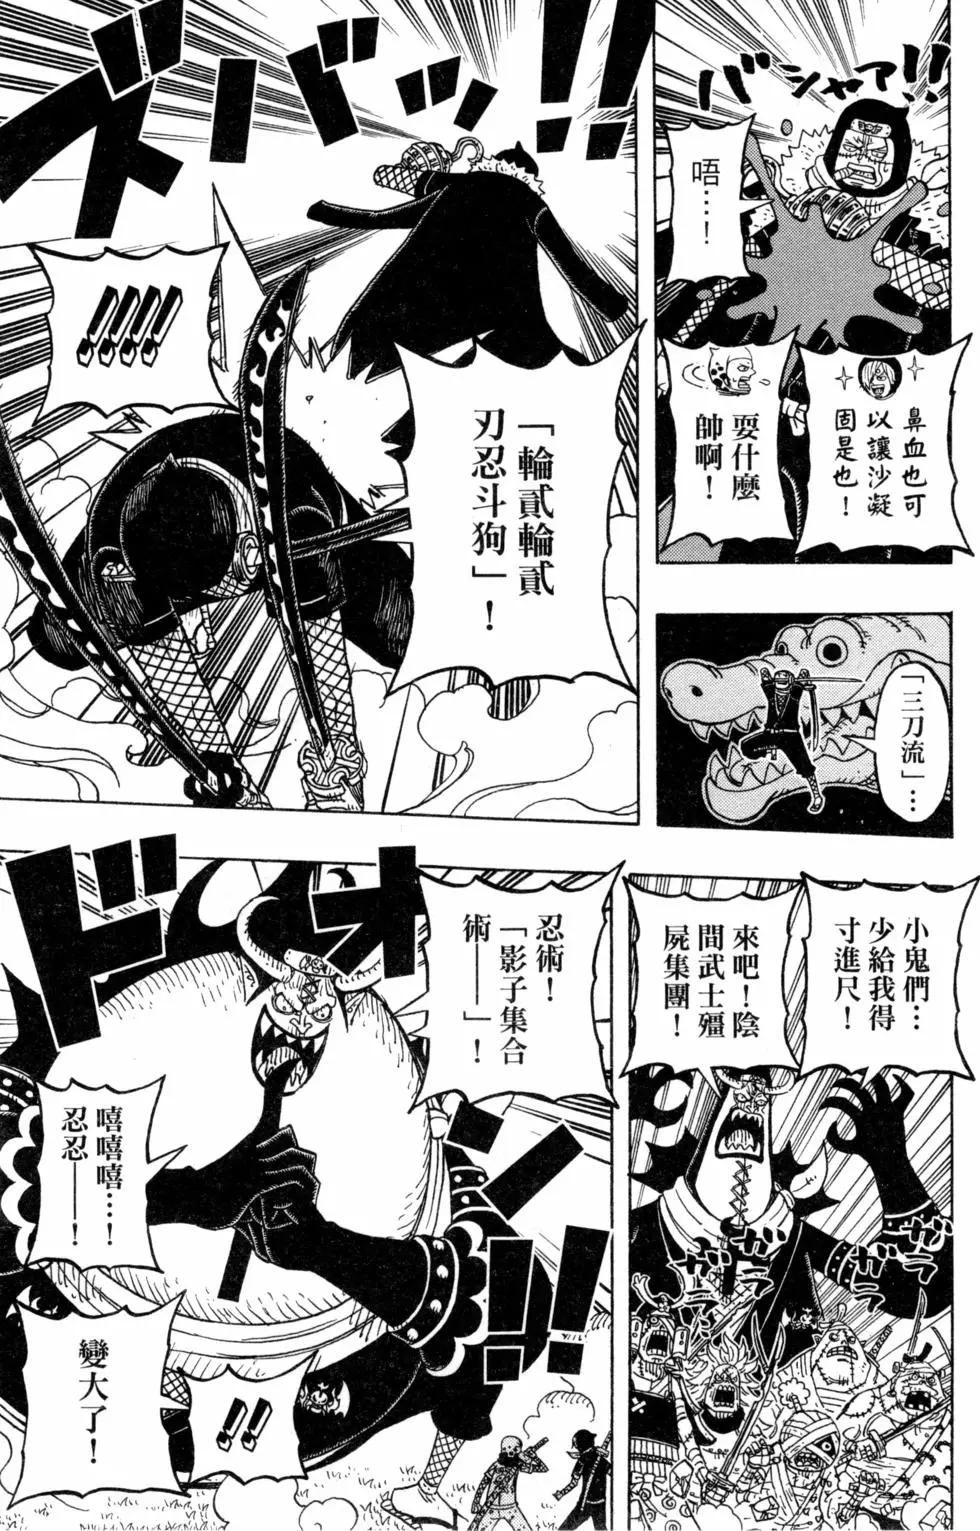 One piece party - 第06卷(1/4) - 4